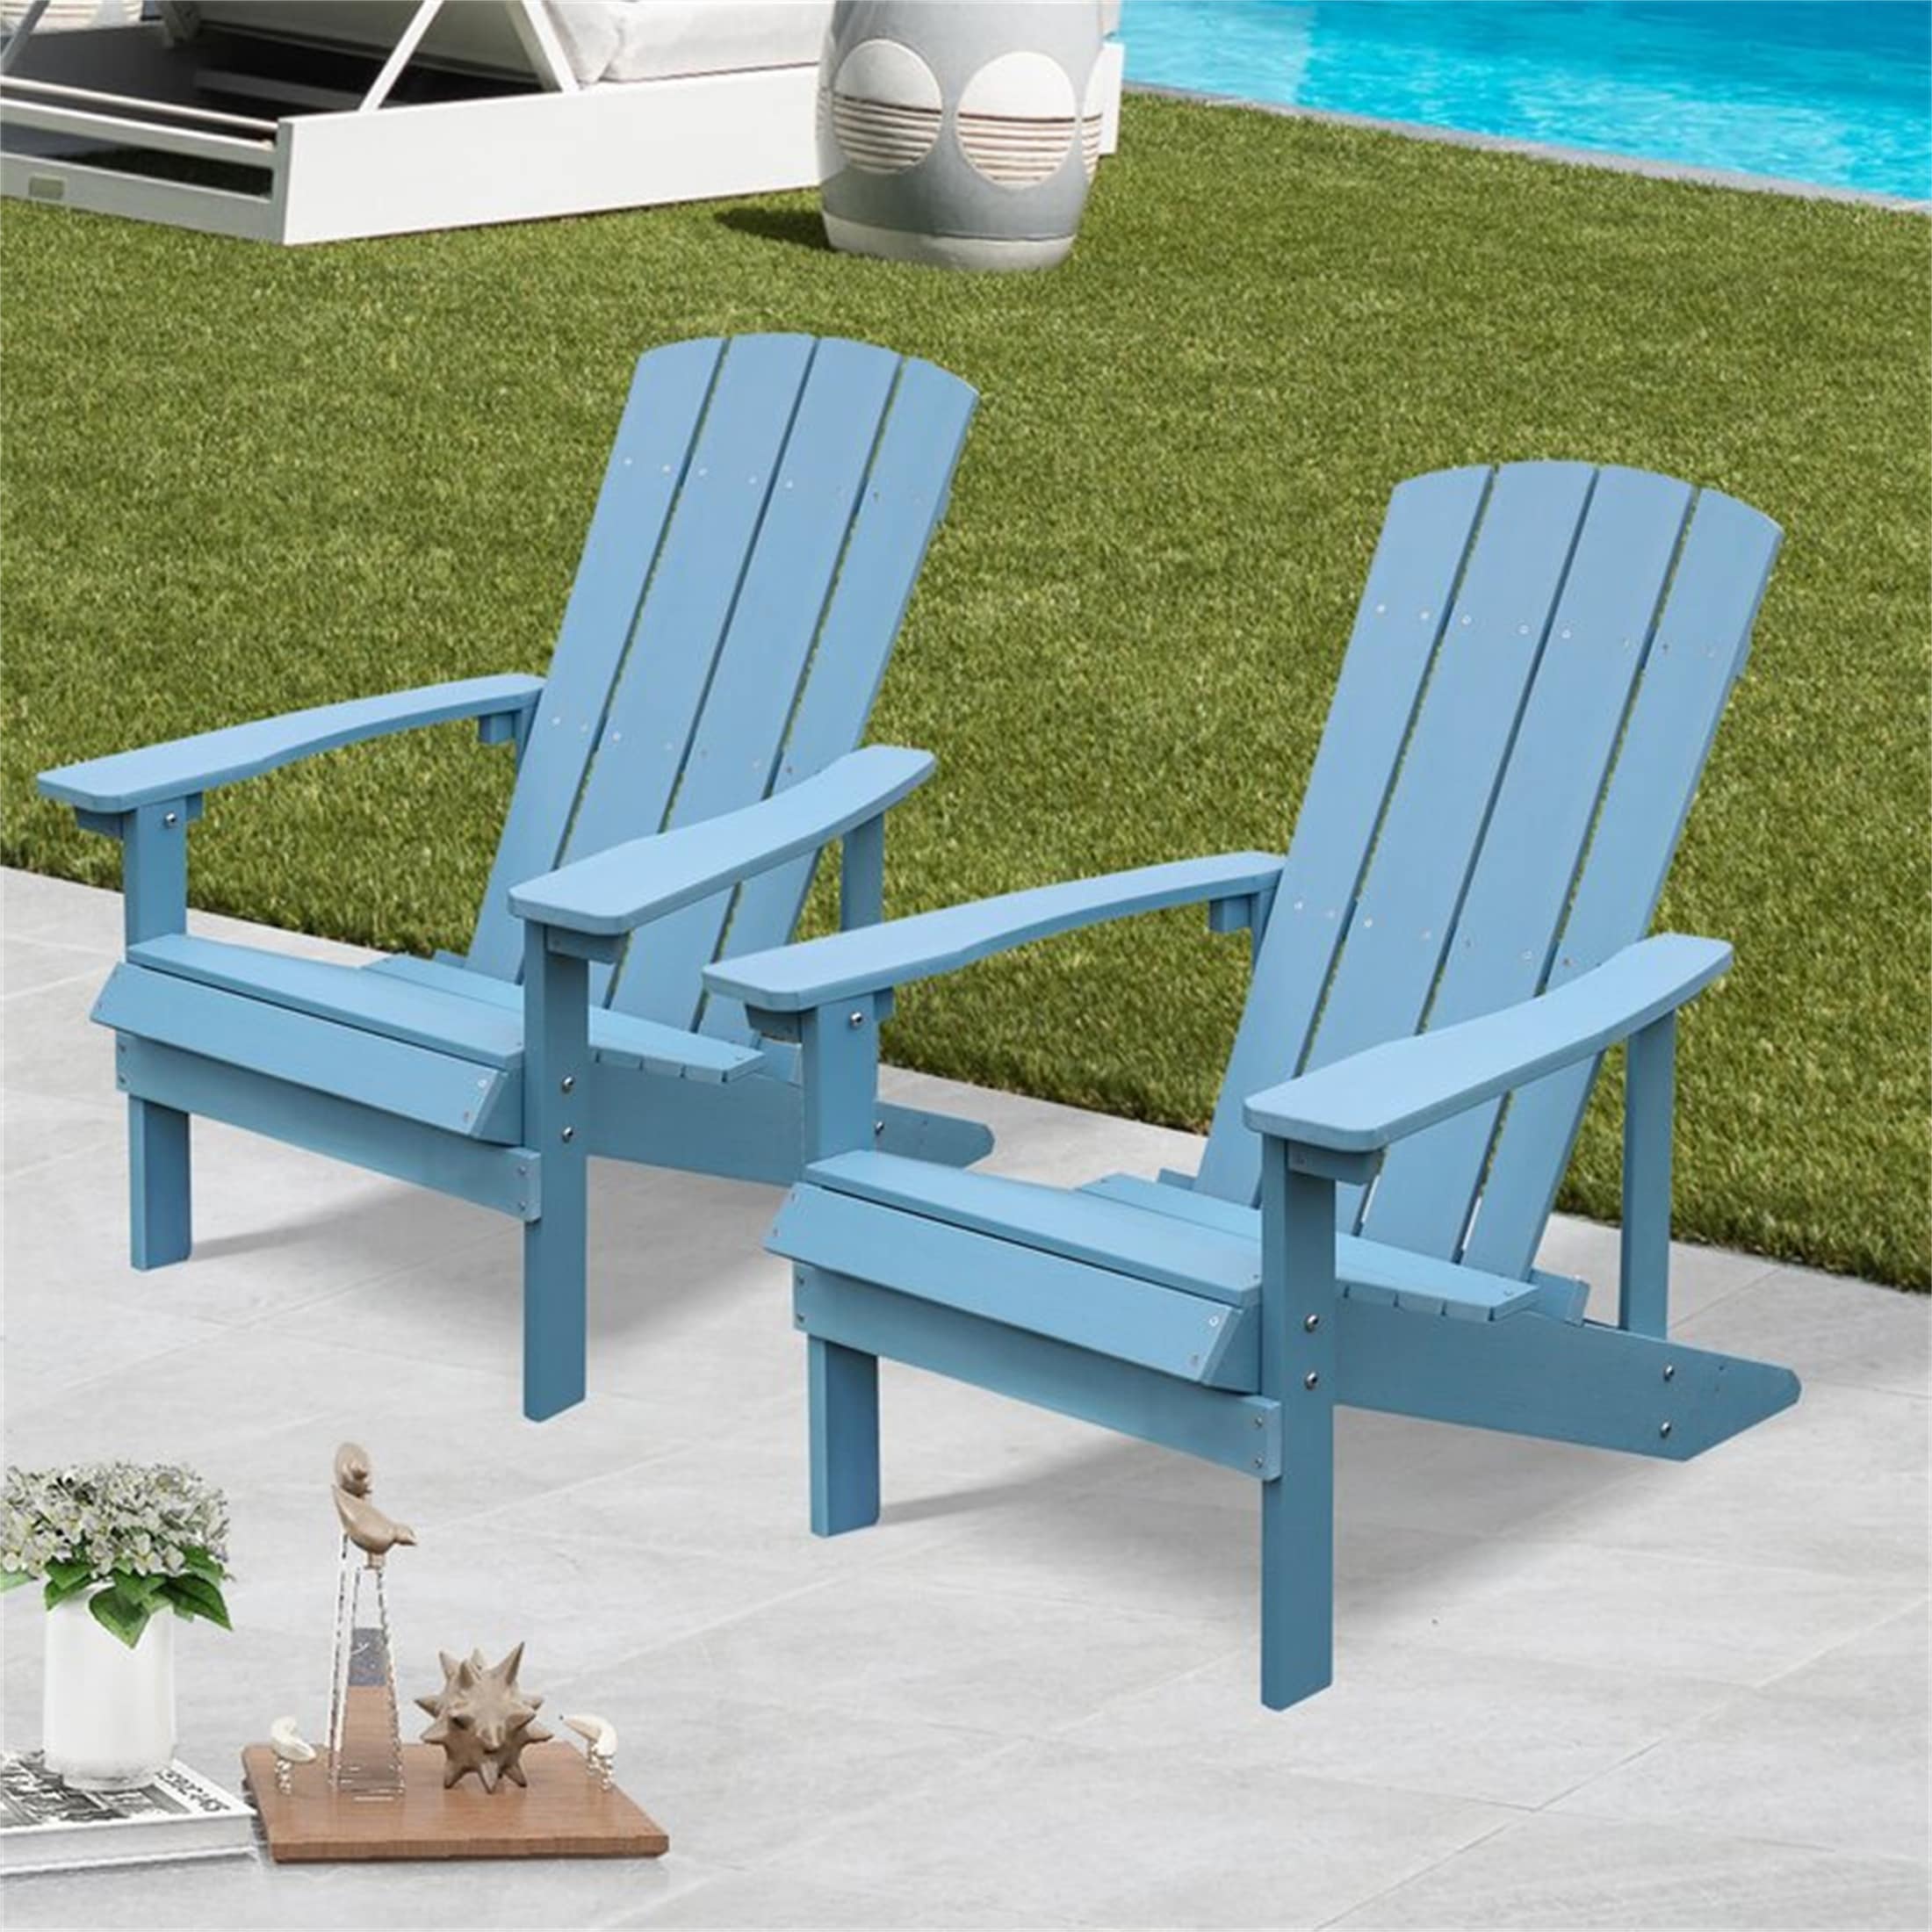 Set Of 2 Patio Chairs Outdoor Beach Chairs